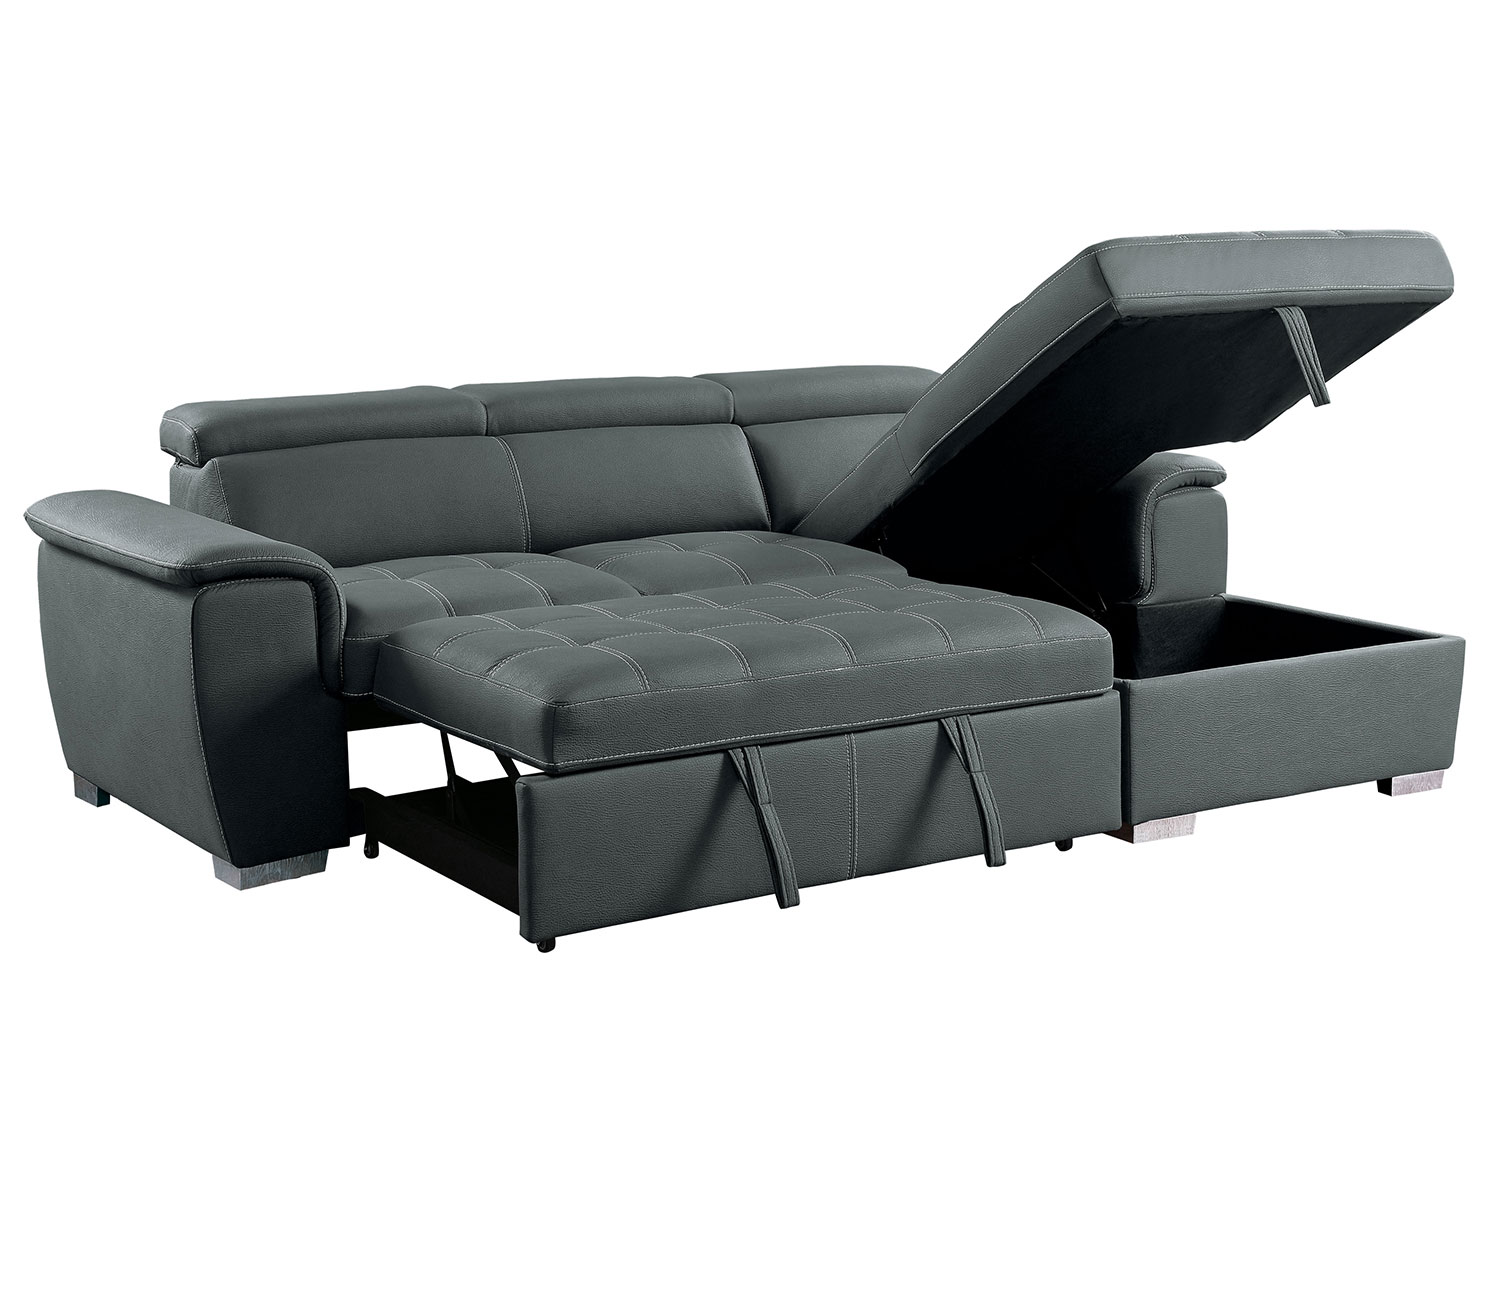 Homelegance Ferriday Sectional with Pull-out Bed and Hidden Storage - Gray